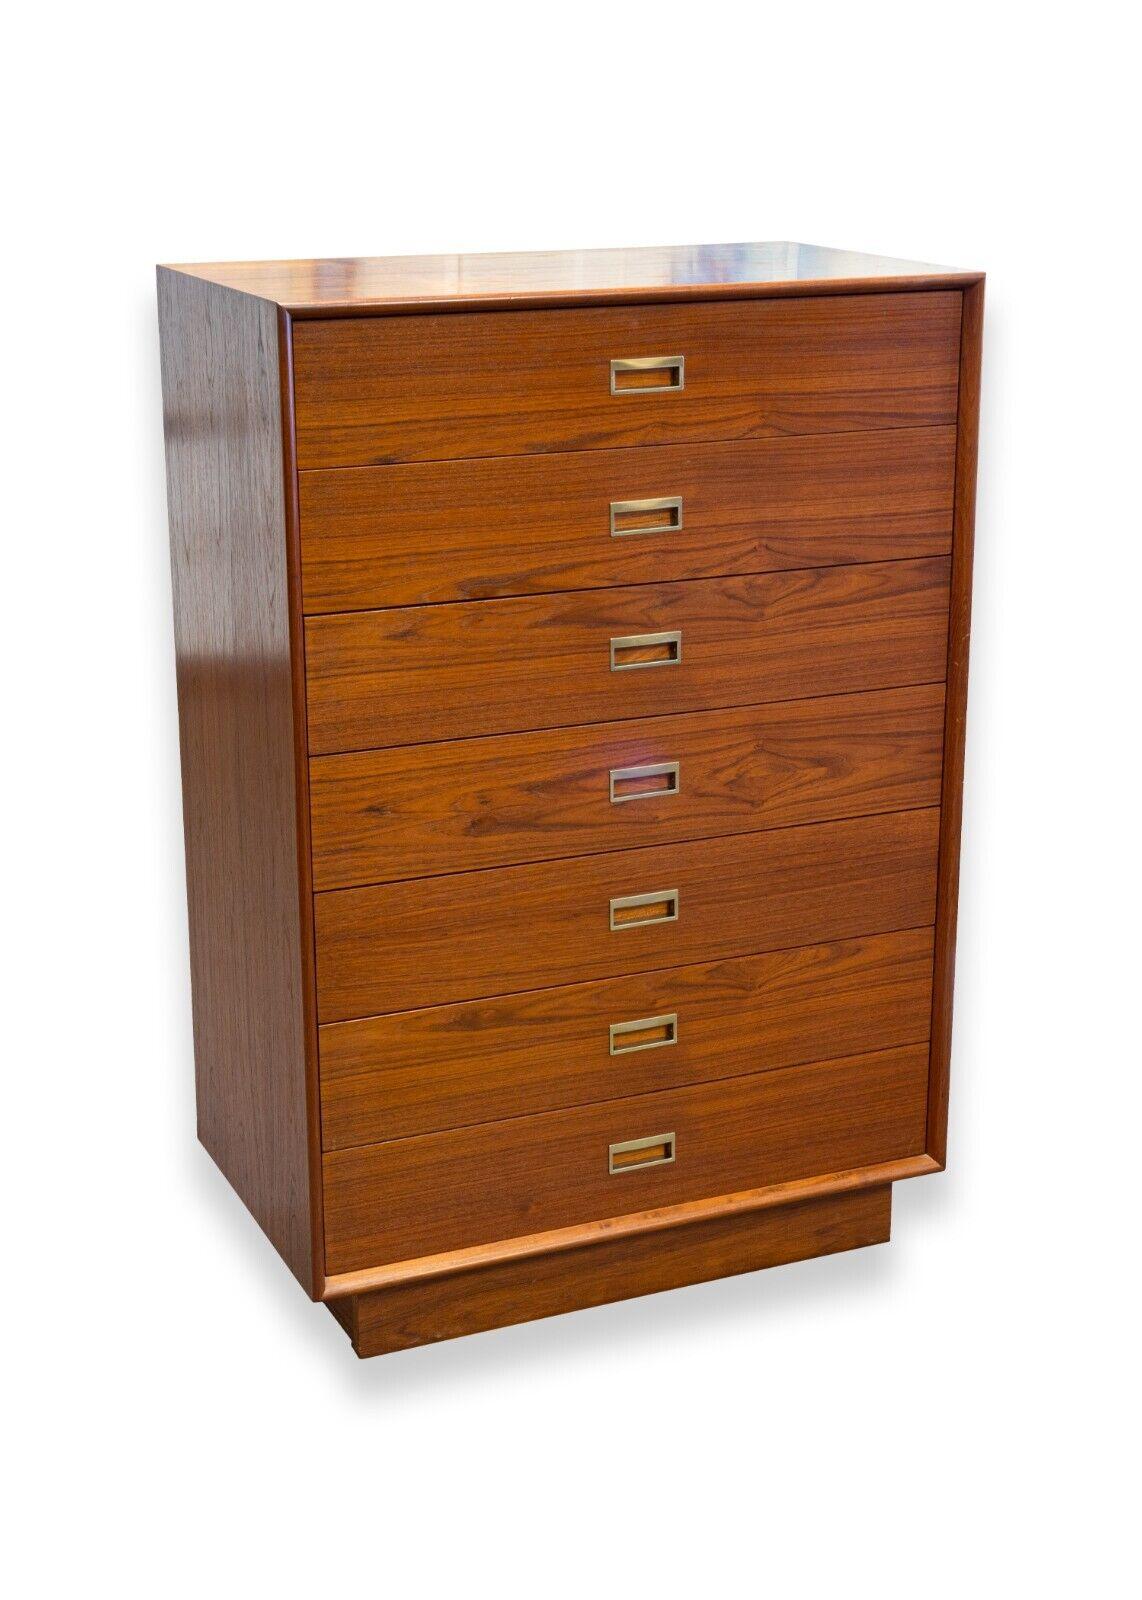 A mid century modern Danish teak wood highboy dresser. A wonderful highboy dresser of Danish origin. This piece features a gorgeous teak wood construction with brass handles, 7 equally sized sliding drawers, and an unfinished back. This piece is in